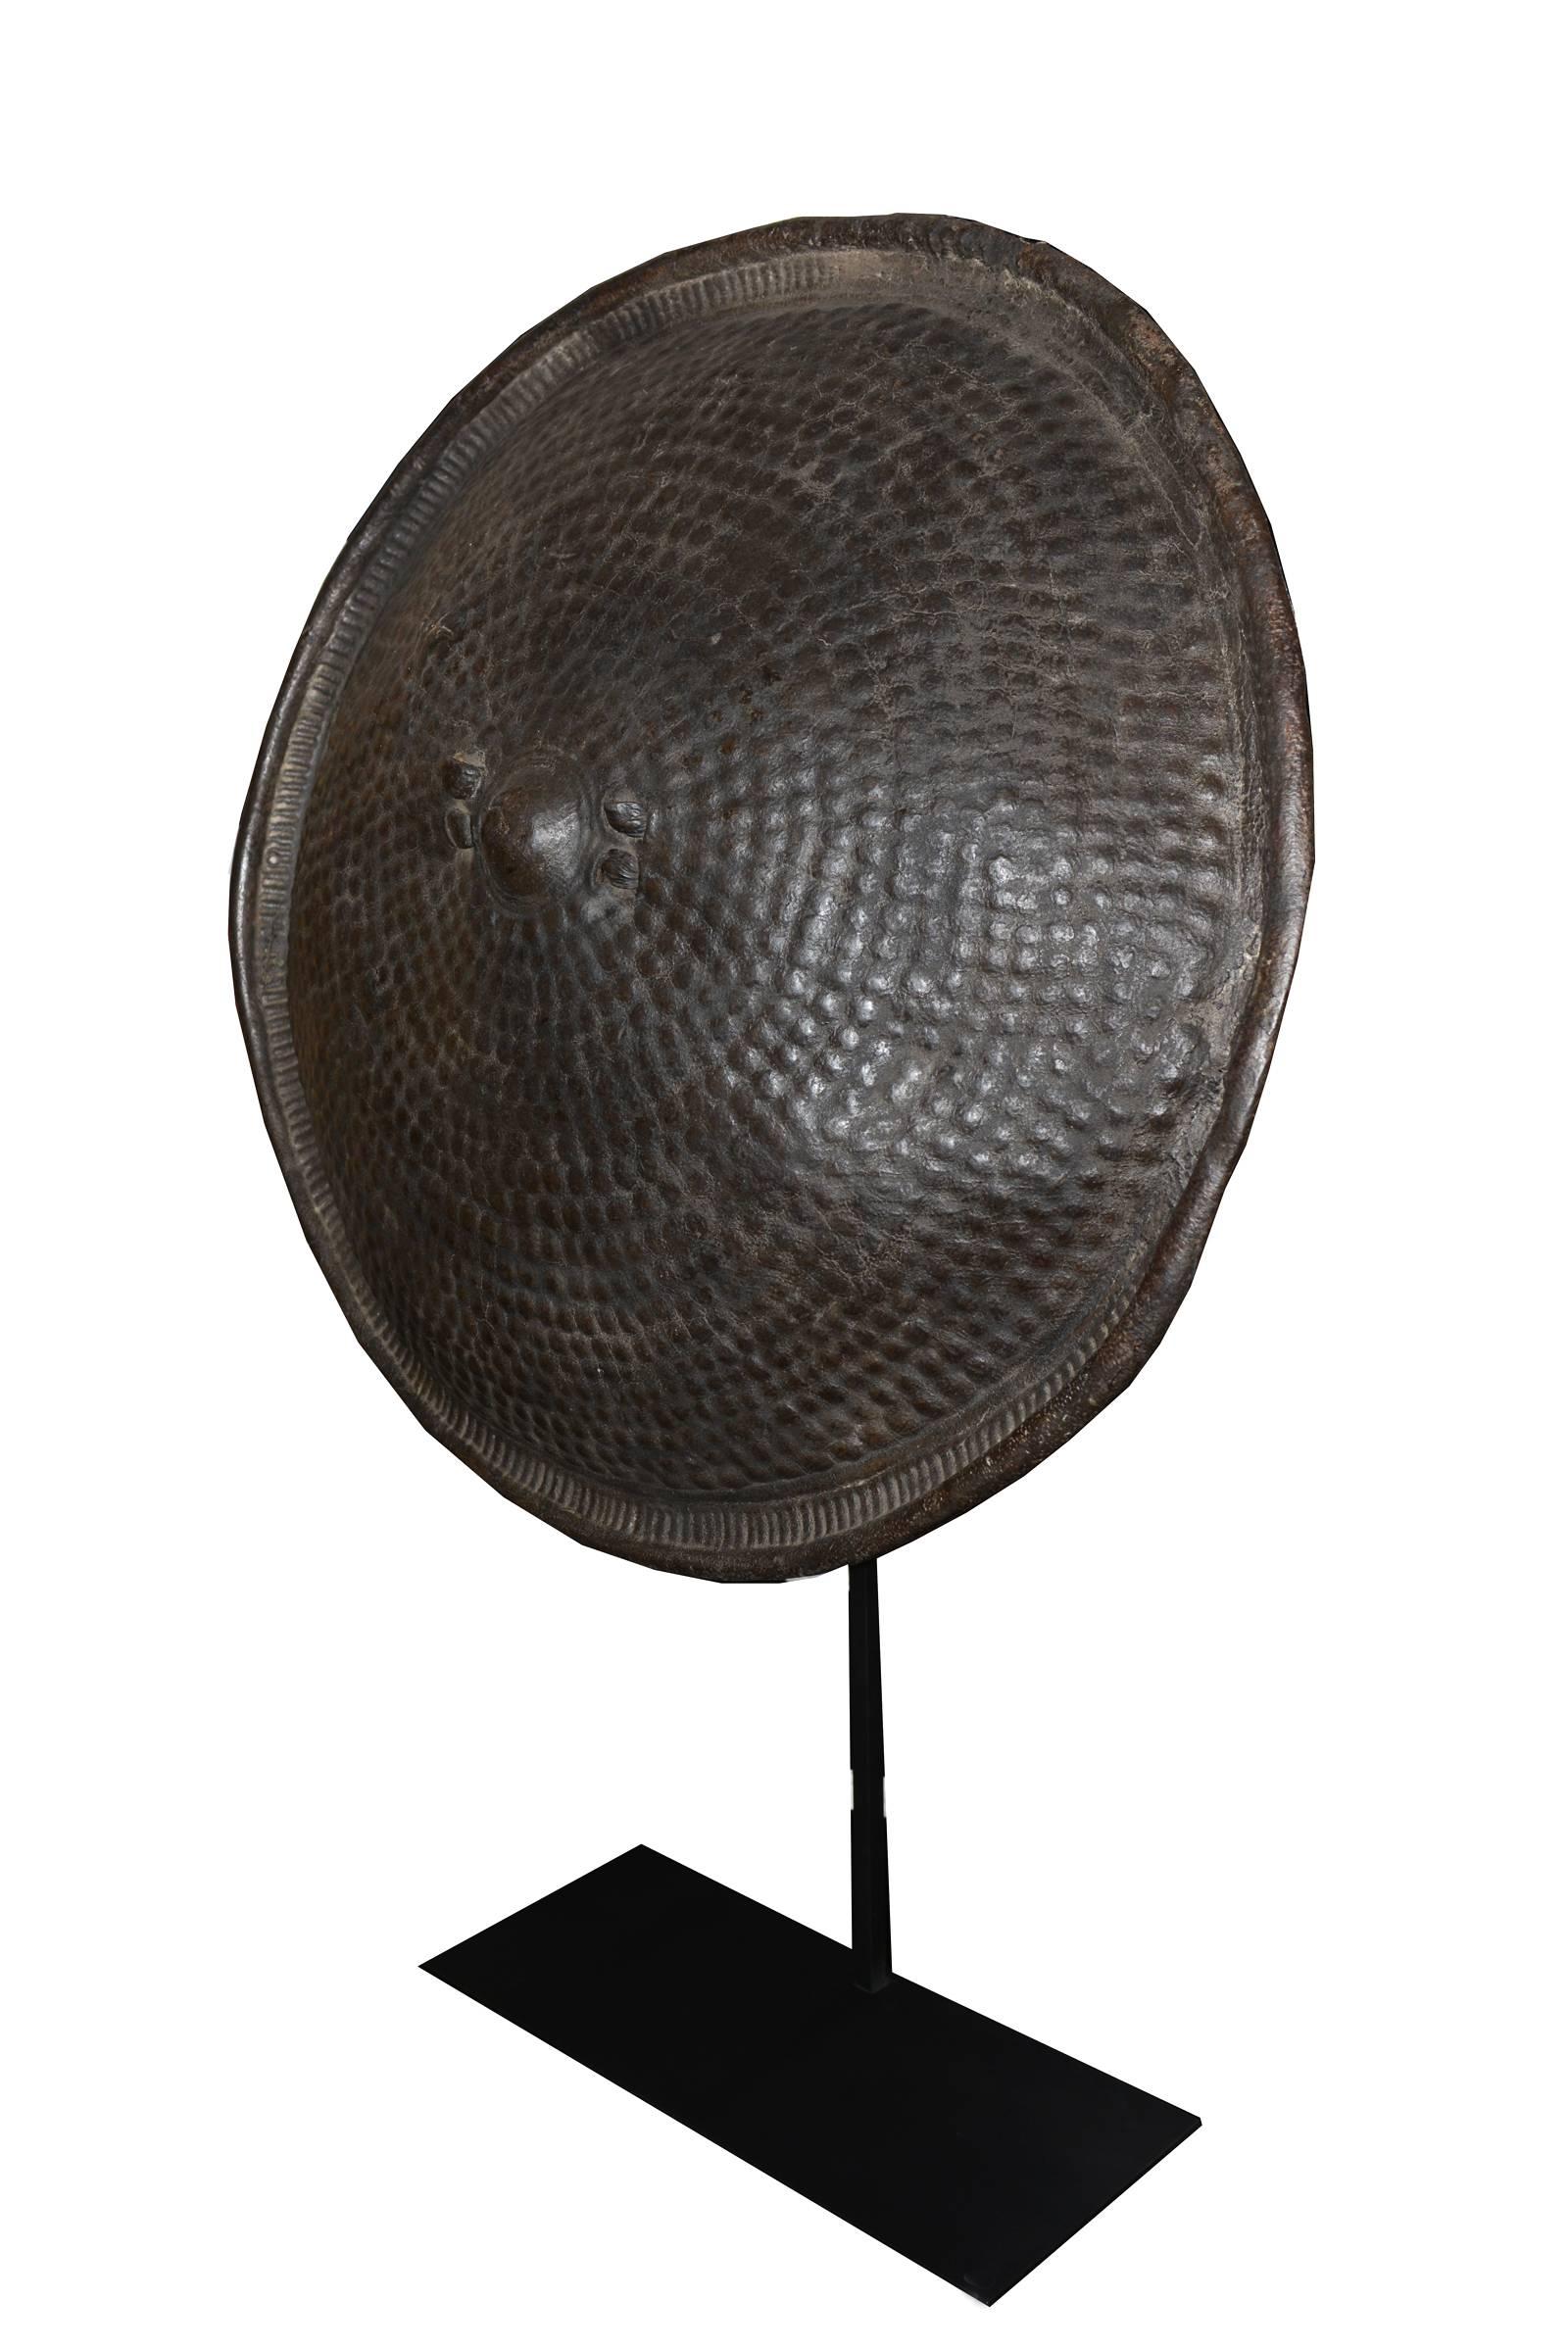 African shield Wallaïta from Ethiopia, early 20th century.
Base: 40 x 17cm.
